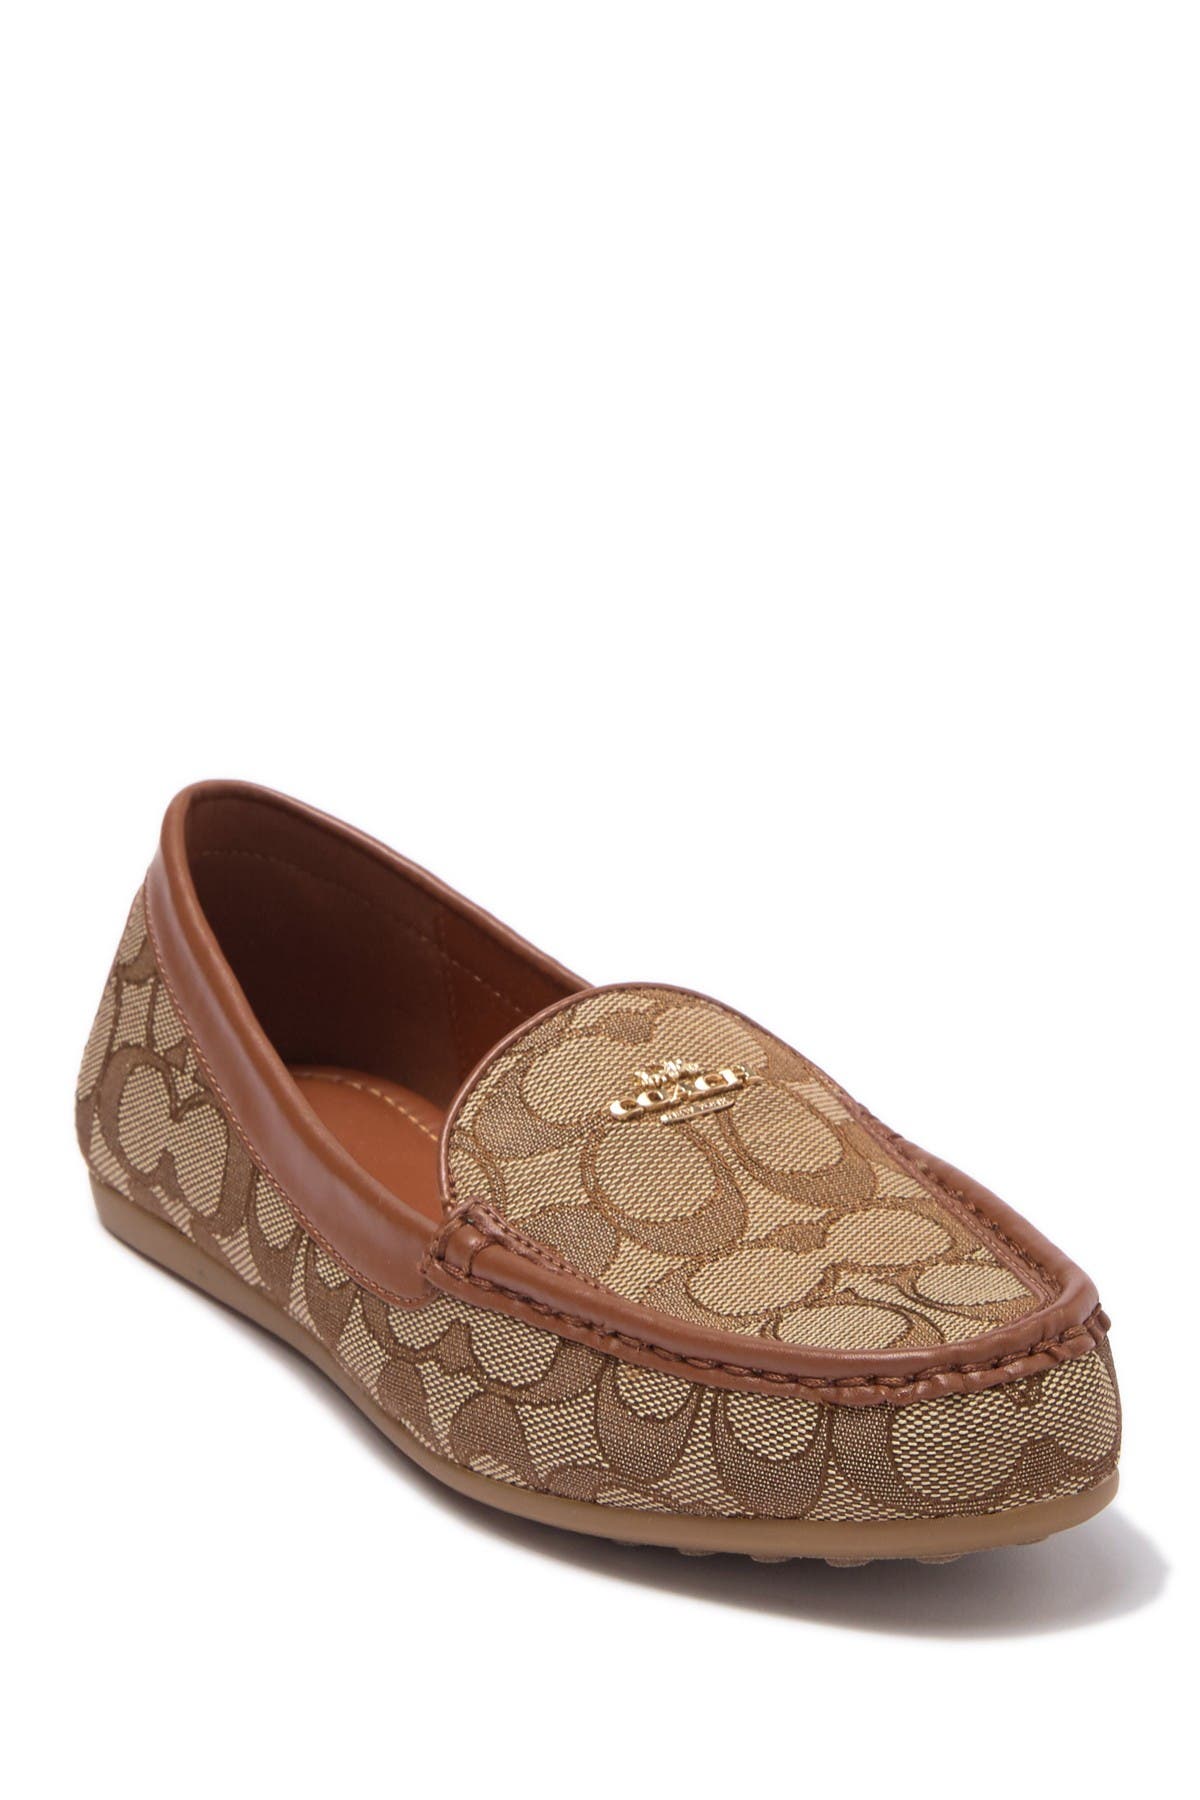 coach loafers nordstrom rack